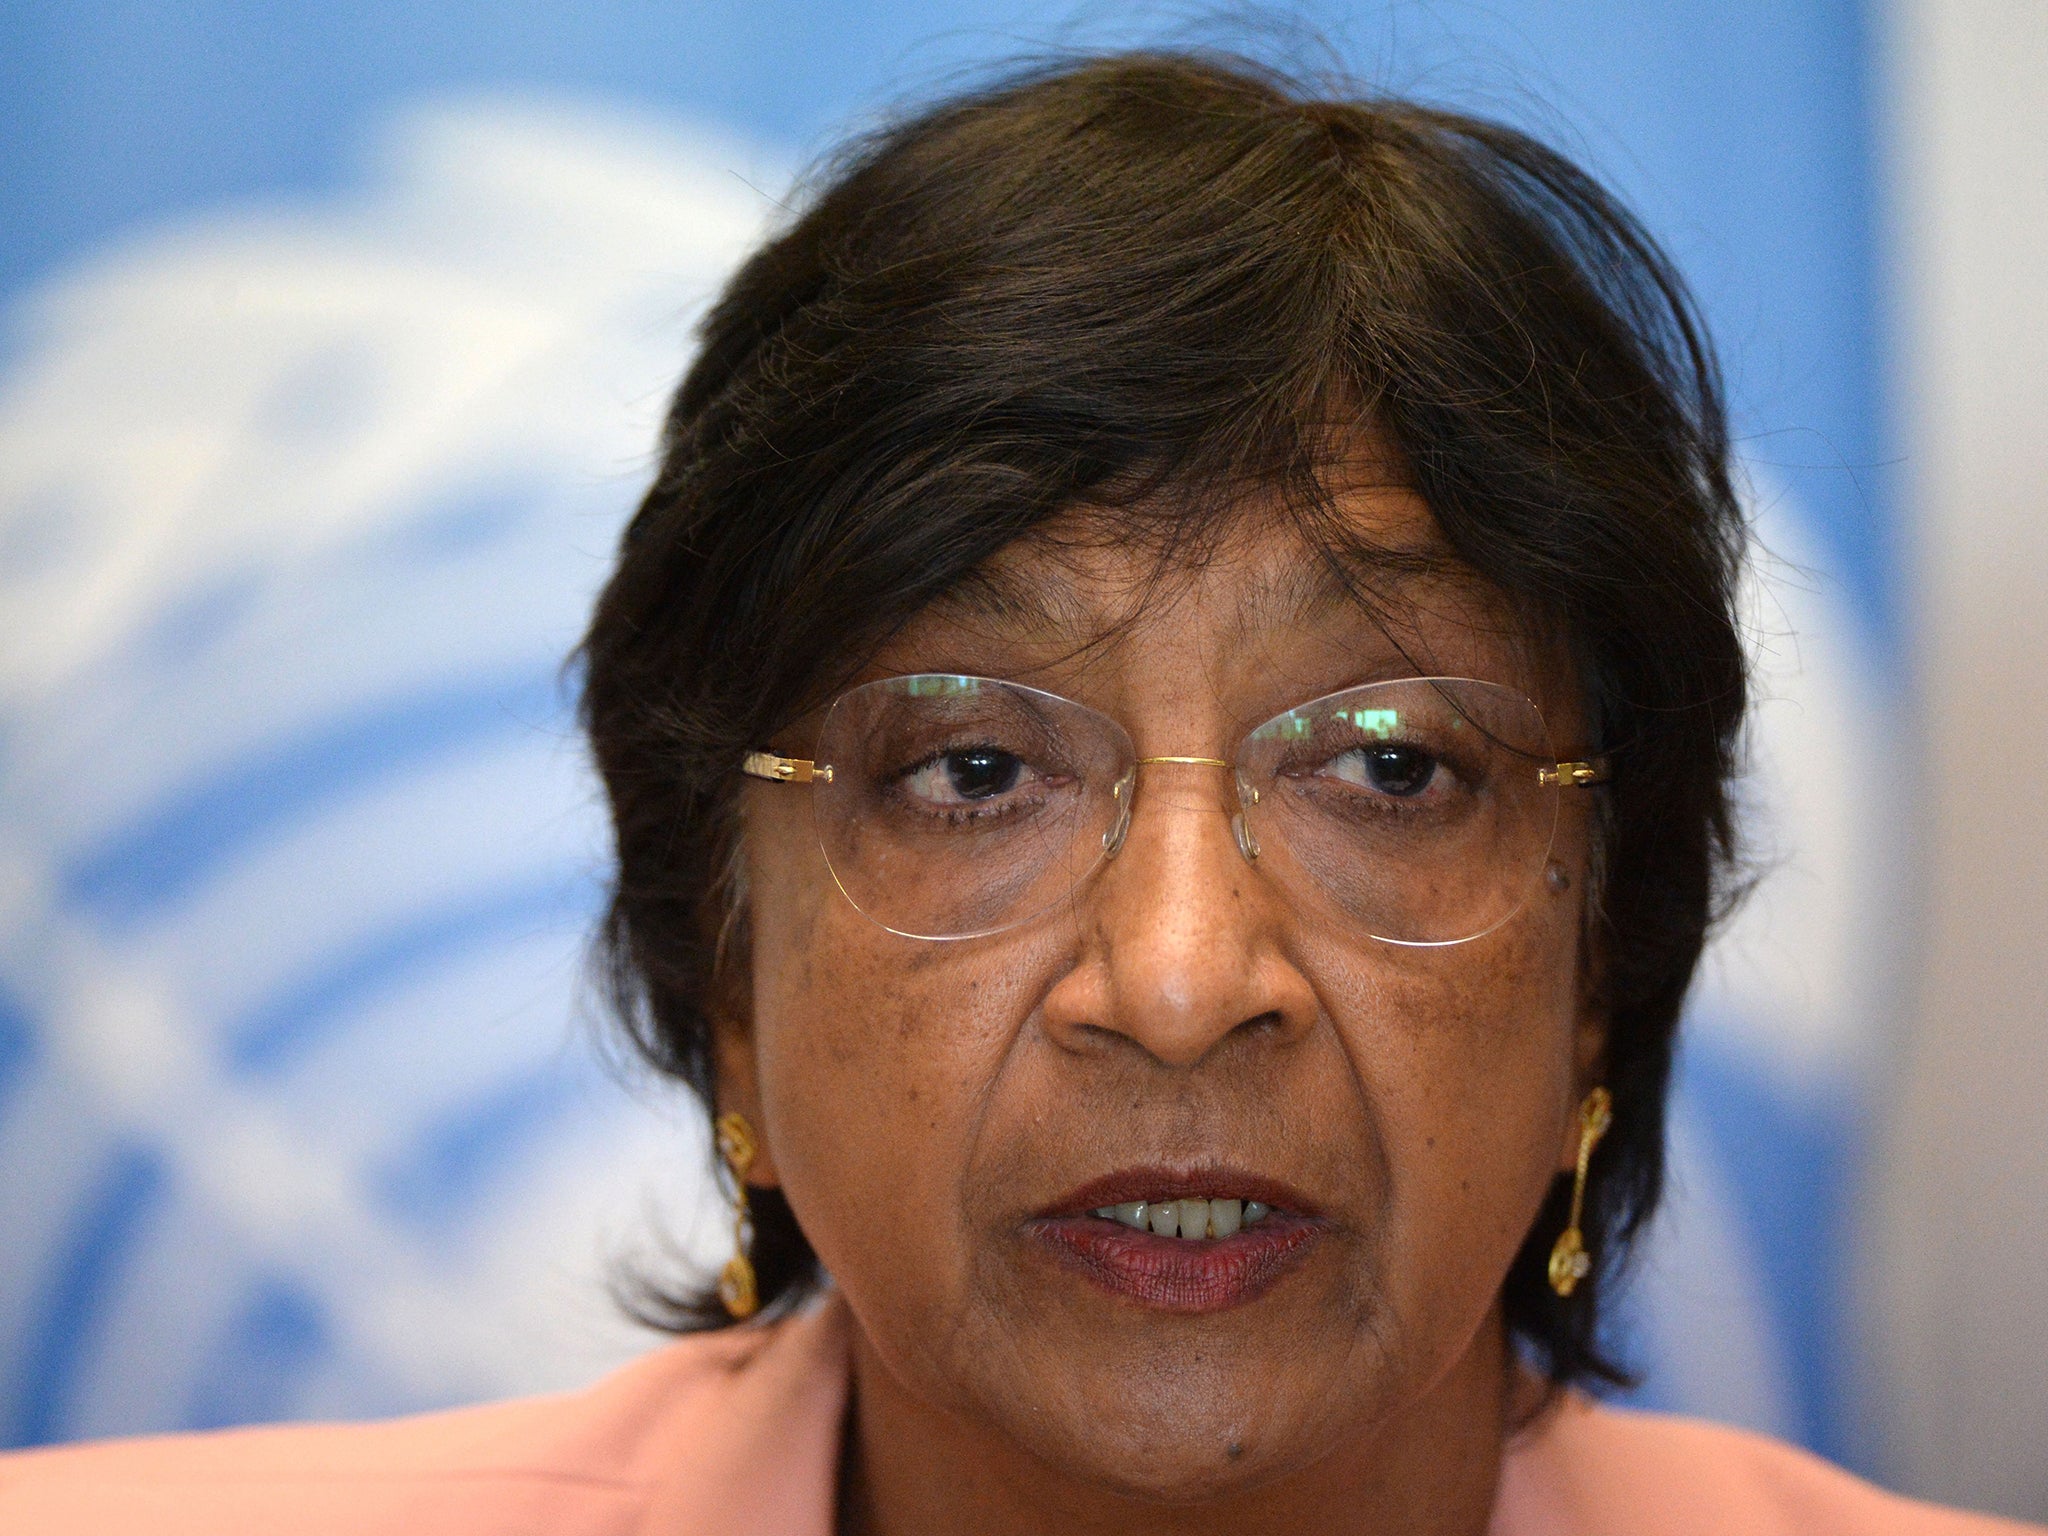 UN Human Rights chief Navi Pillay is putting together a report into Sri Lanka's alleged war crimes